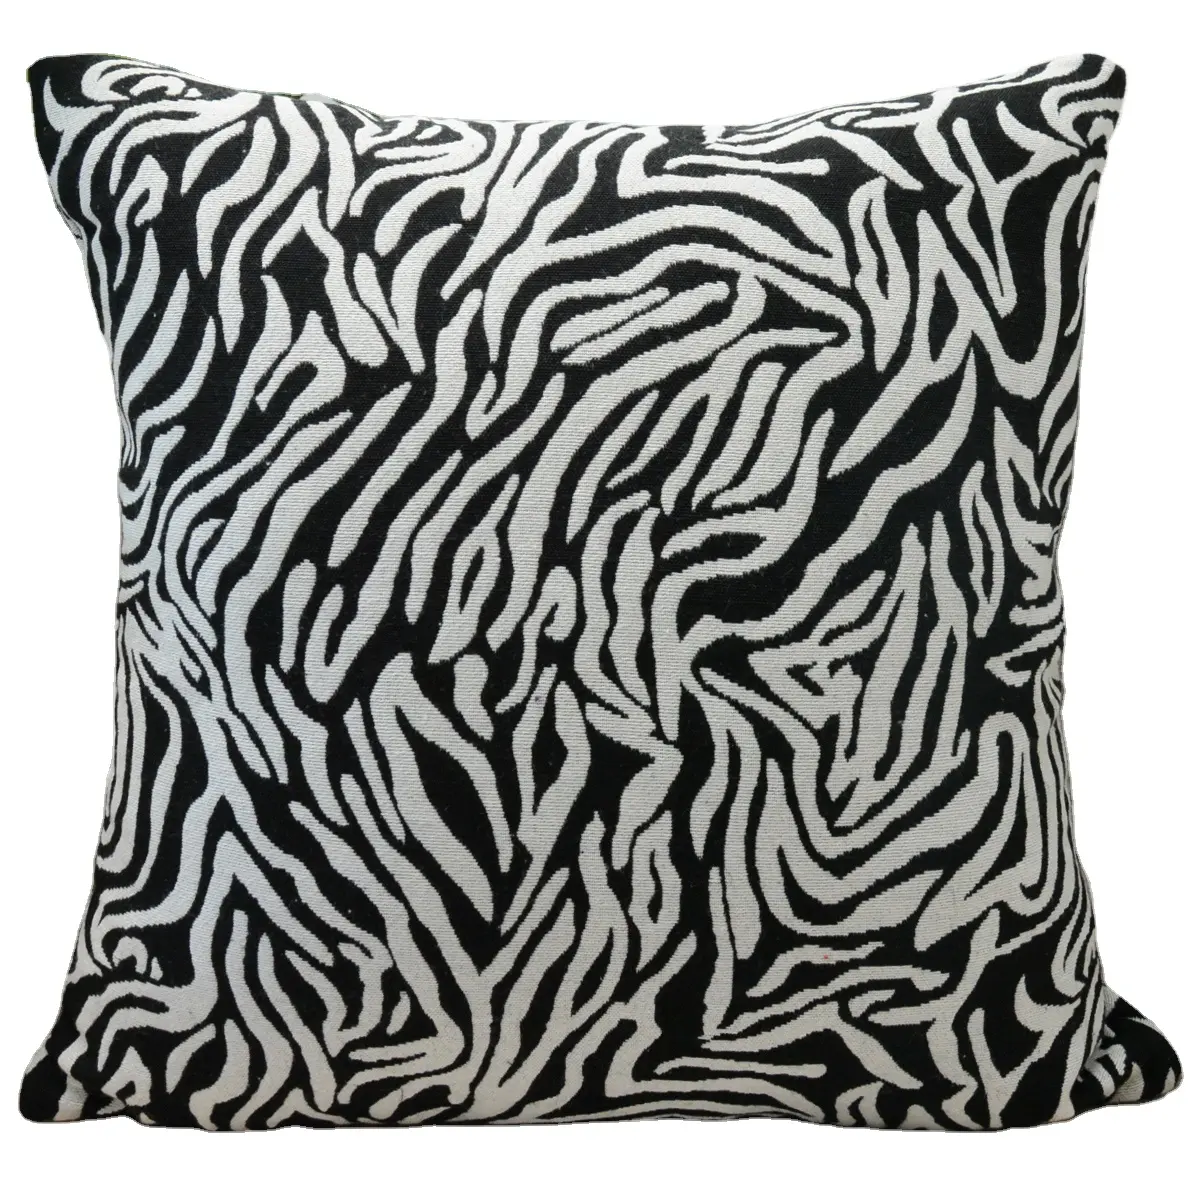 High Quality Animal Leopard Jacquard throw Pillow Covers 18x18 inch Square Patterned Cushion Cases knife edge